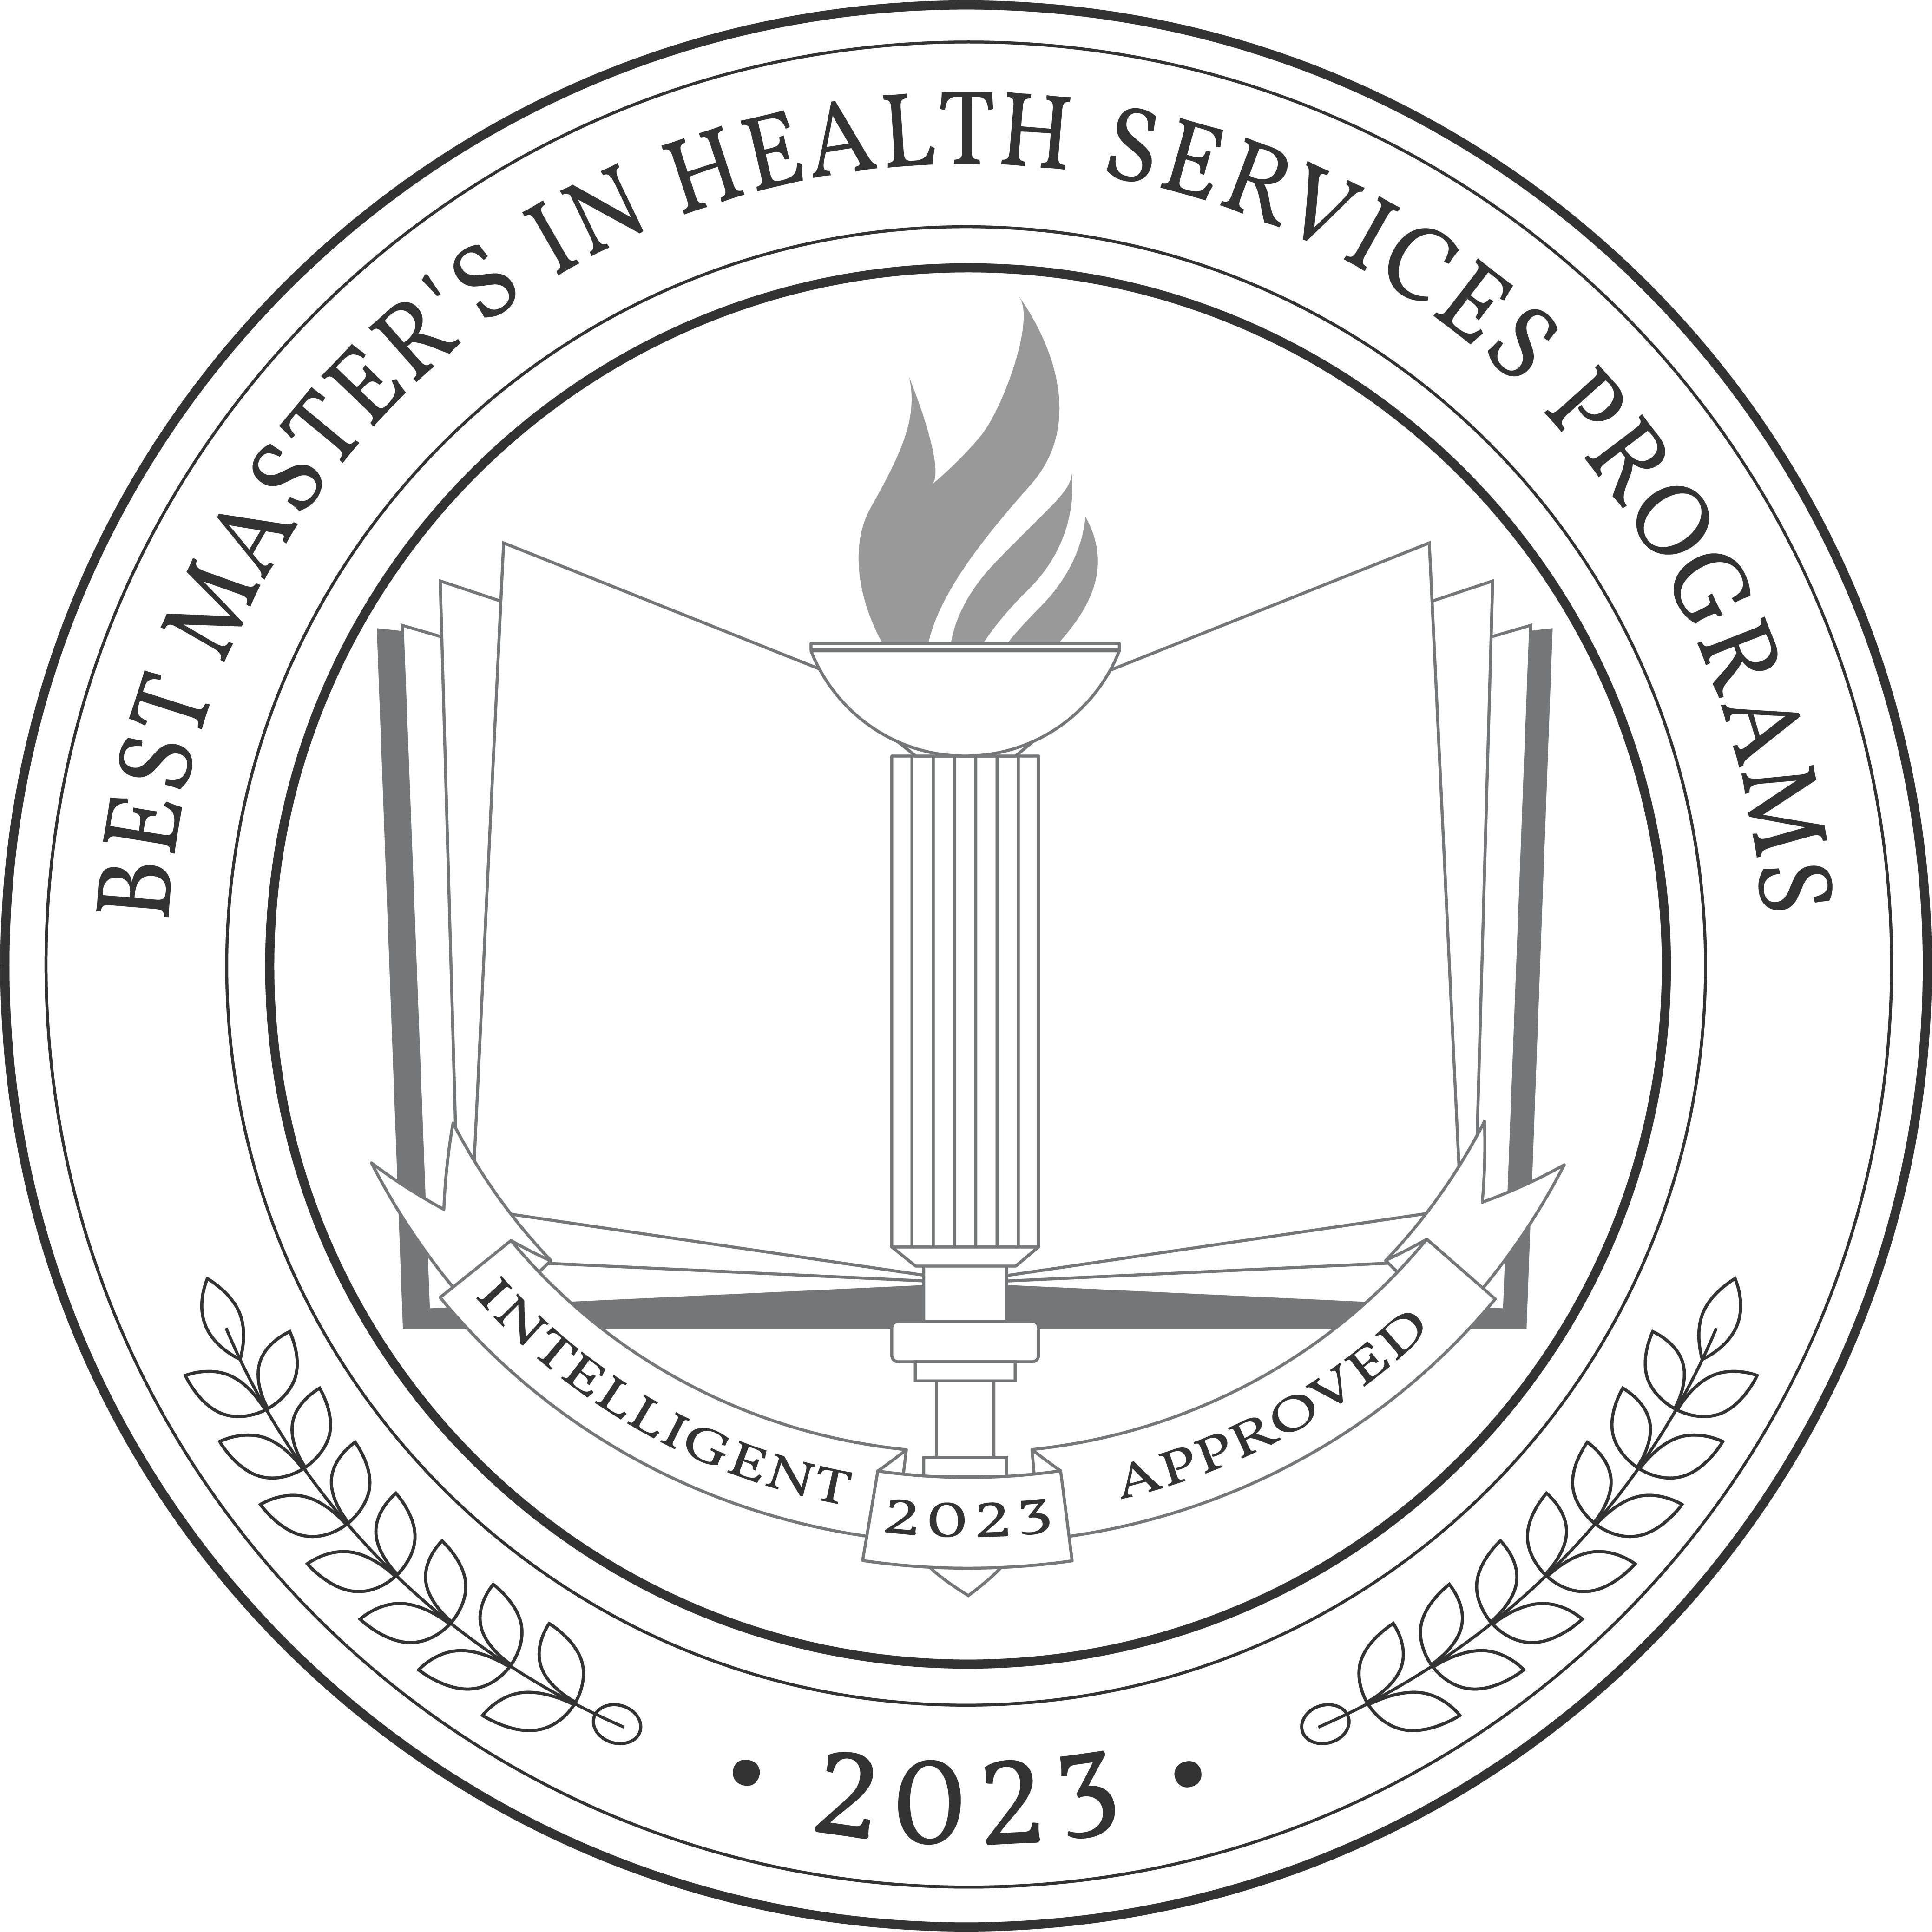 Best Masters In Health Services Programs 